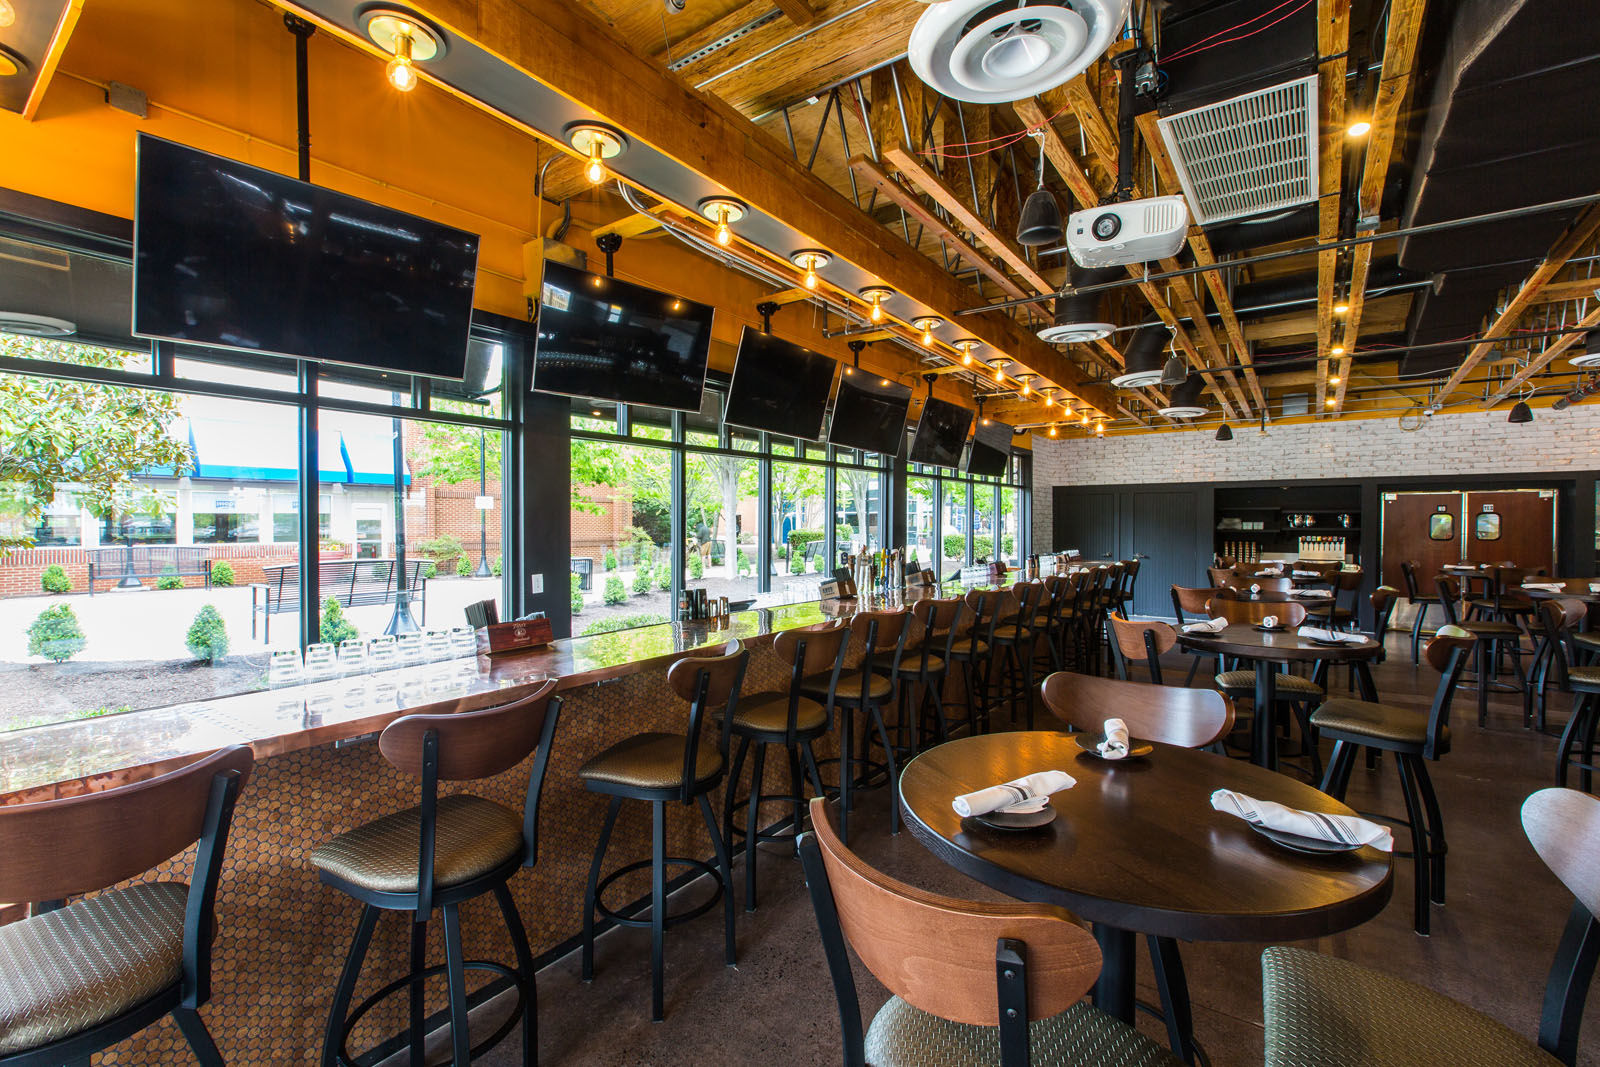 Cordero's other restaurants include A-Town Bar Grill, Barley Mac, Bronx Pizza and Subs, and Don Tito, all in the Rosslyn-Ballston corridor, plus Don Taco in Alexandria and Primetime Sports Bar and Grill in Fairfax. (Courtesy MACNAC Hospitality)